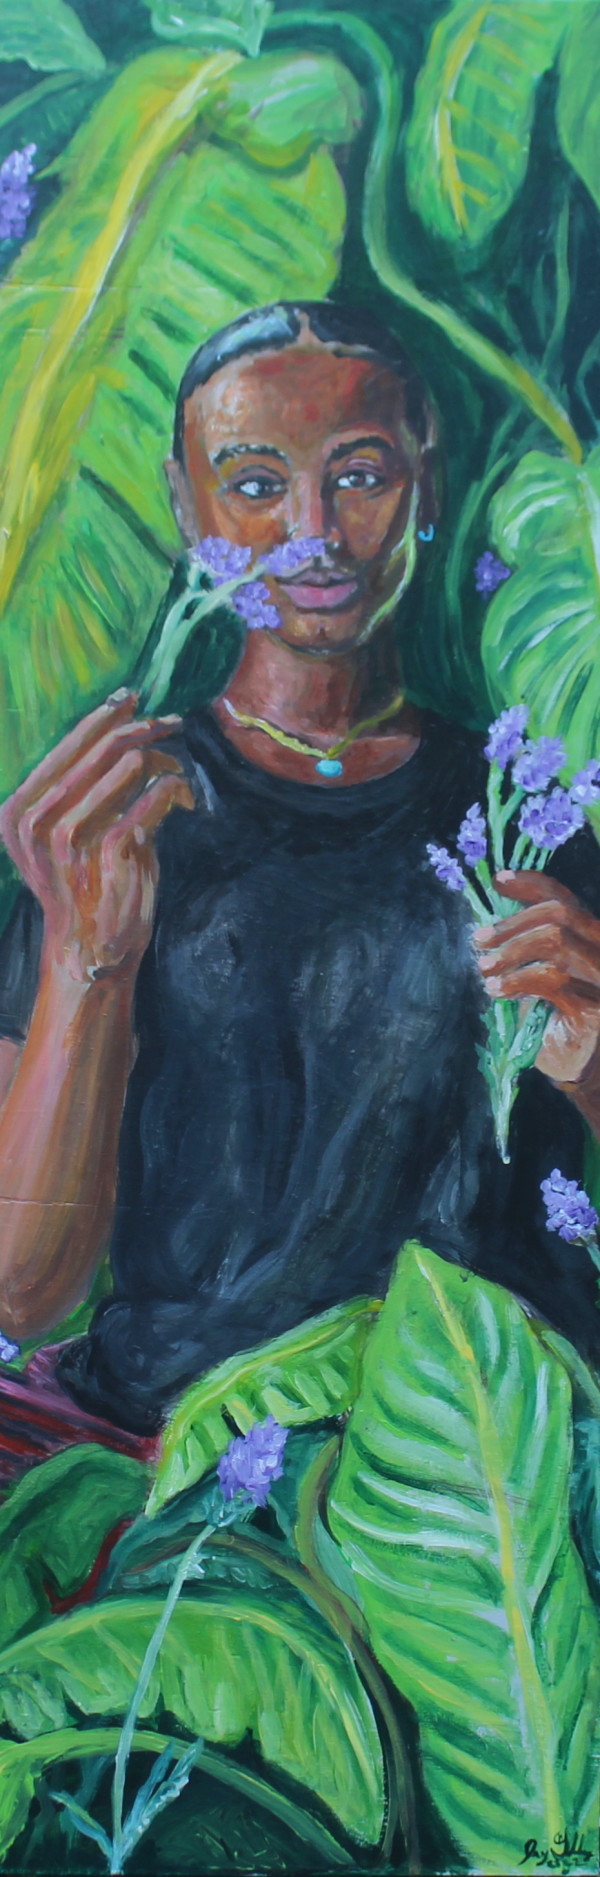 Portrait of Dajia with Lavenders by Jay Golding